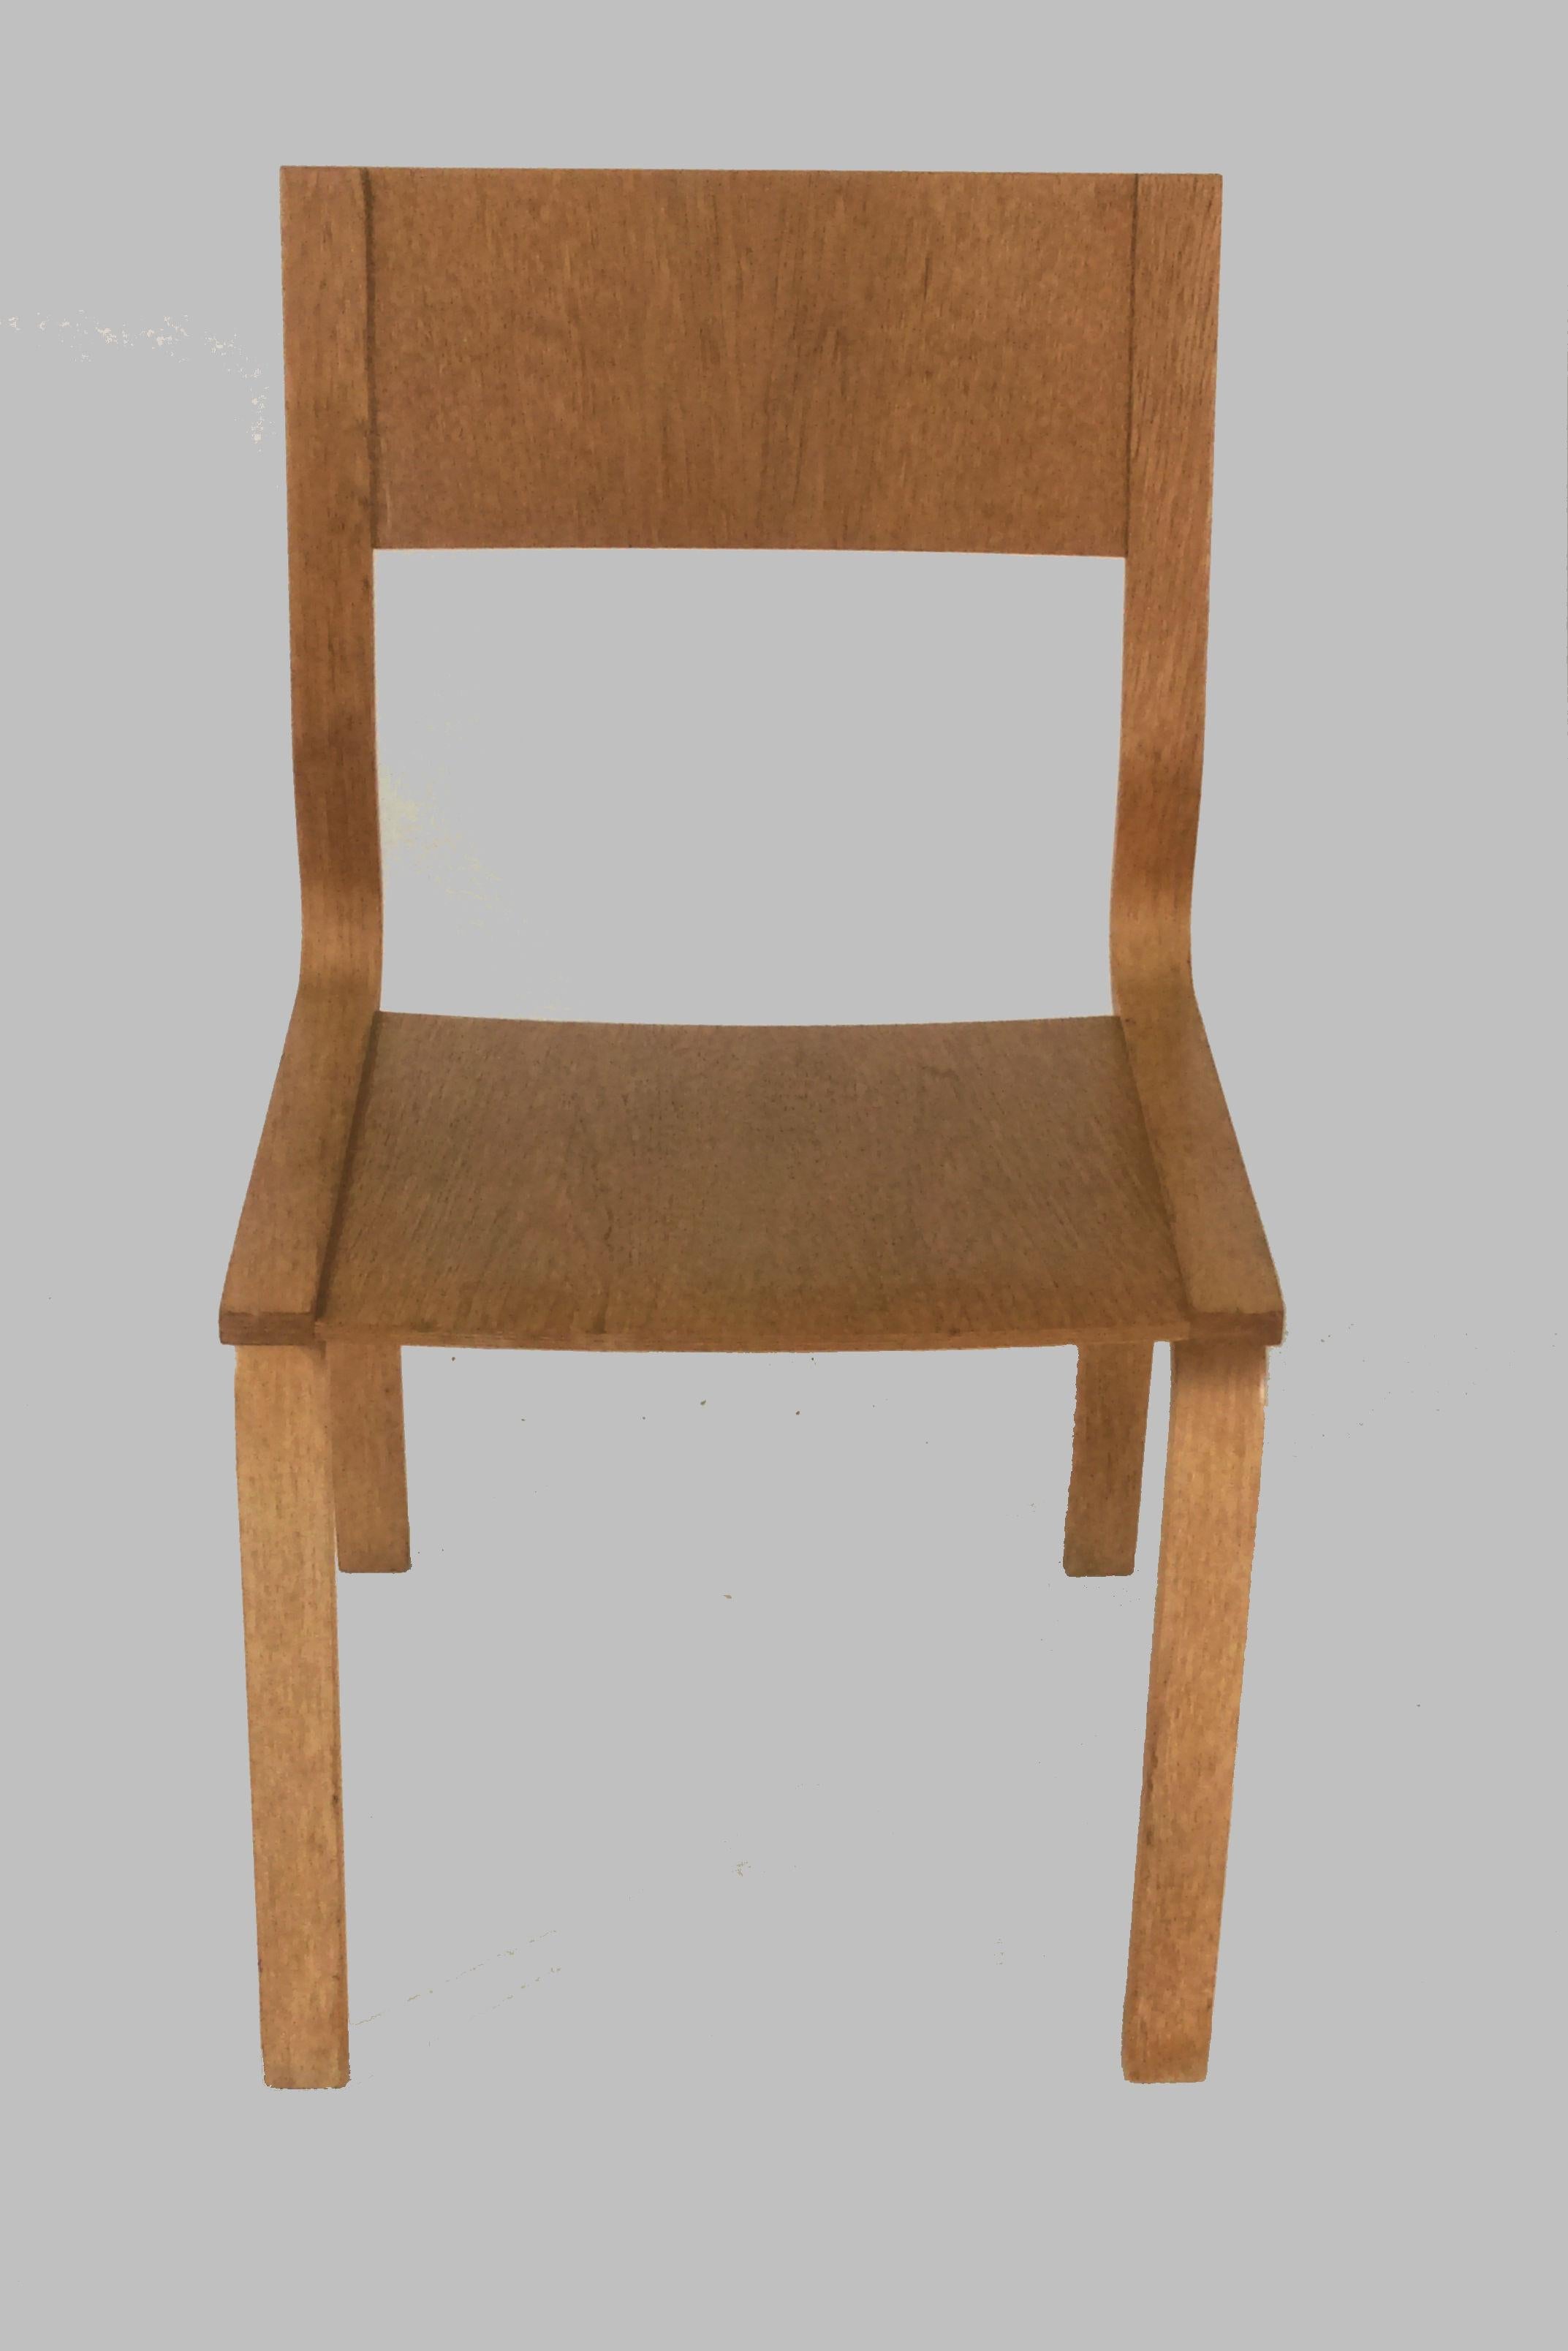 This set of two Saint Chatrines chairs was produced by Fritz Hansen.
The chairs have been overlooked an refinished by our cabinetmaker and are in good condition. 

Arne Jacobsen was the architect and designer of St. Catherines College 